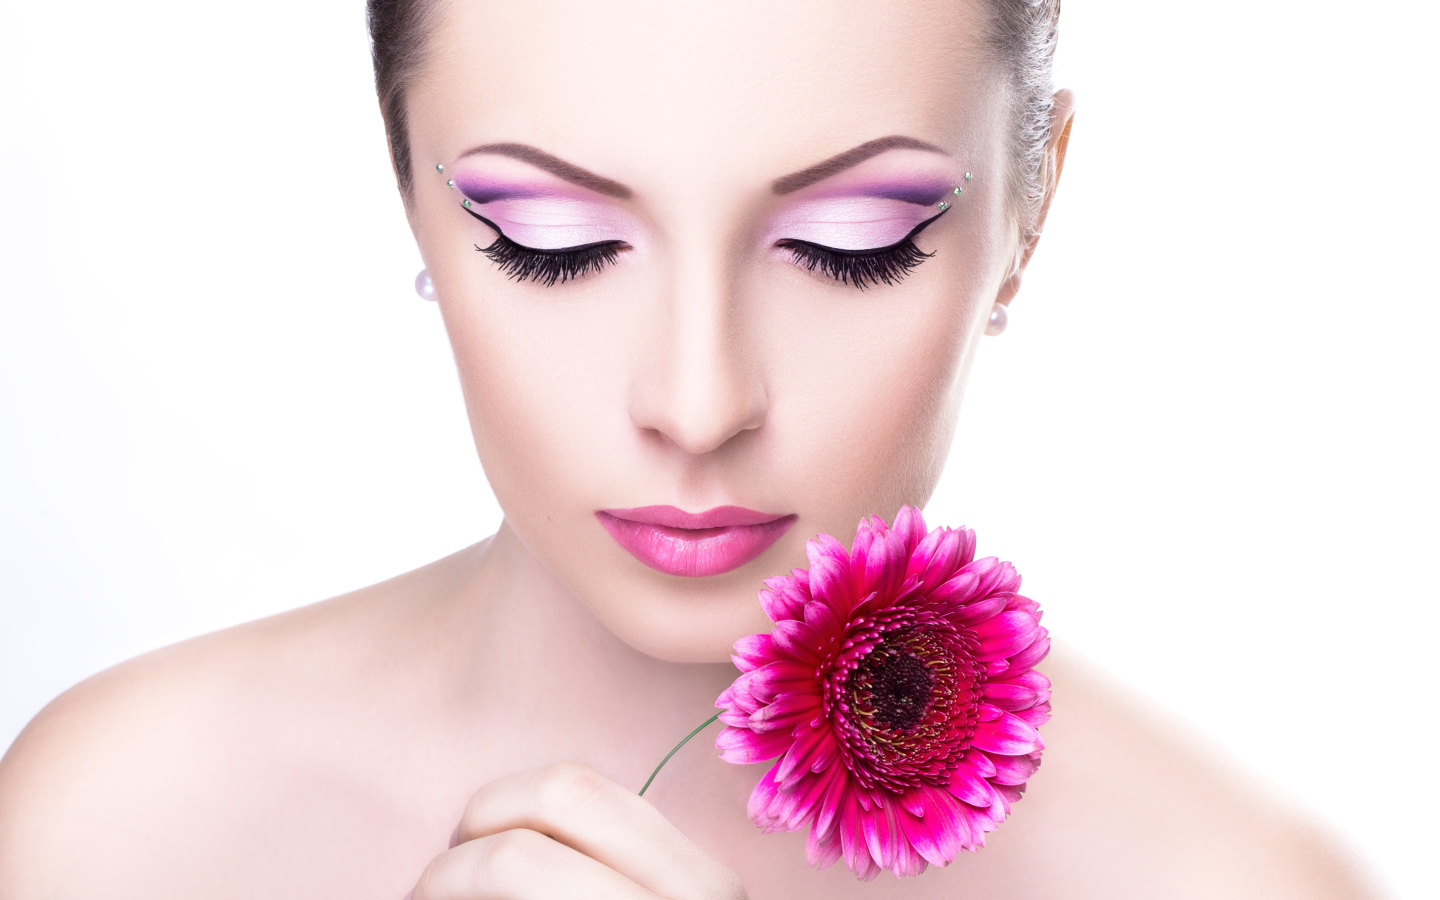 Model girl with a gentle make-up with a pink gerbera flower in her hand